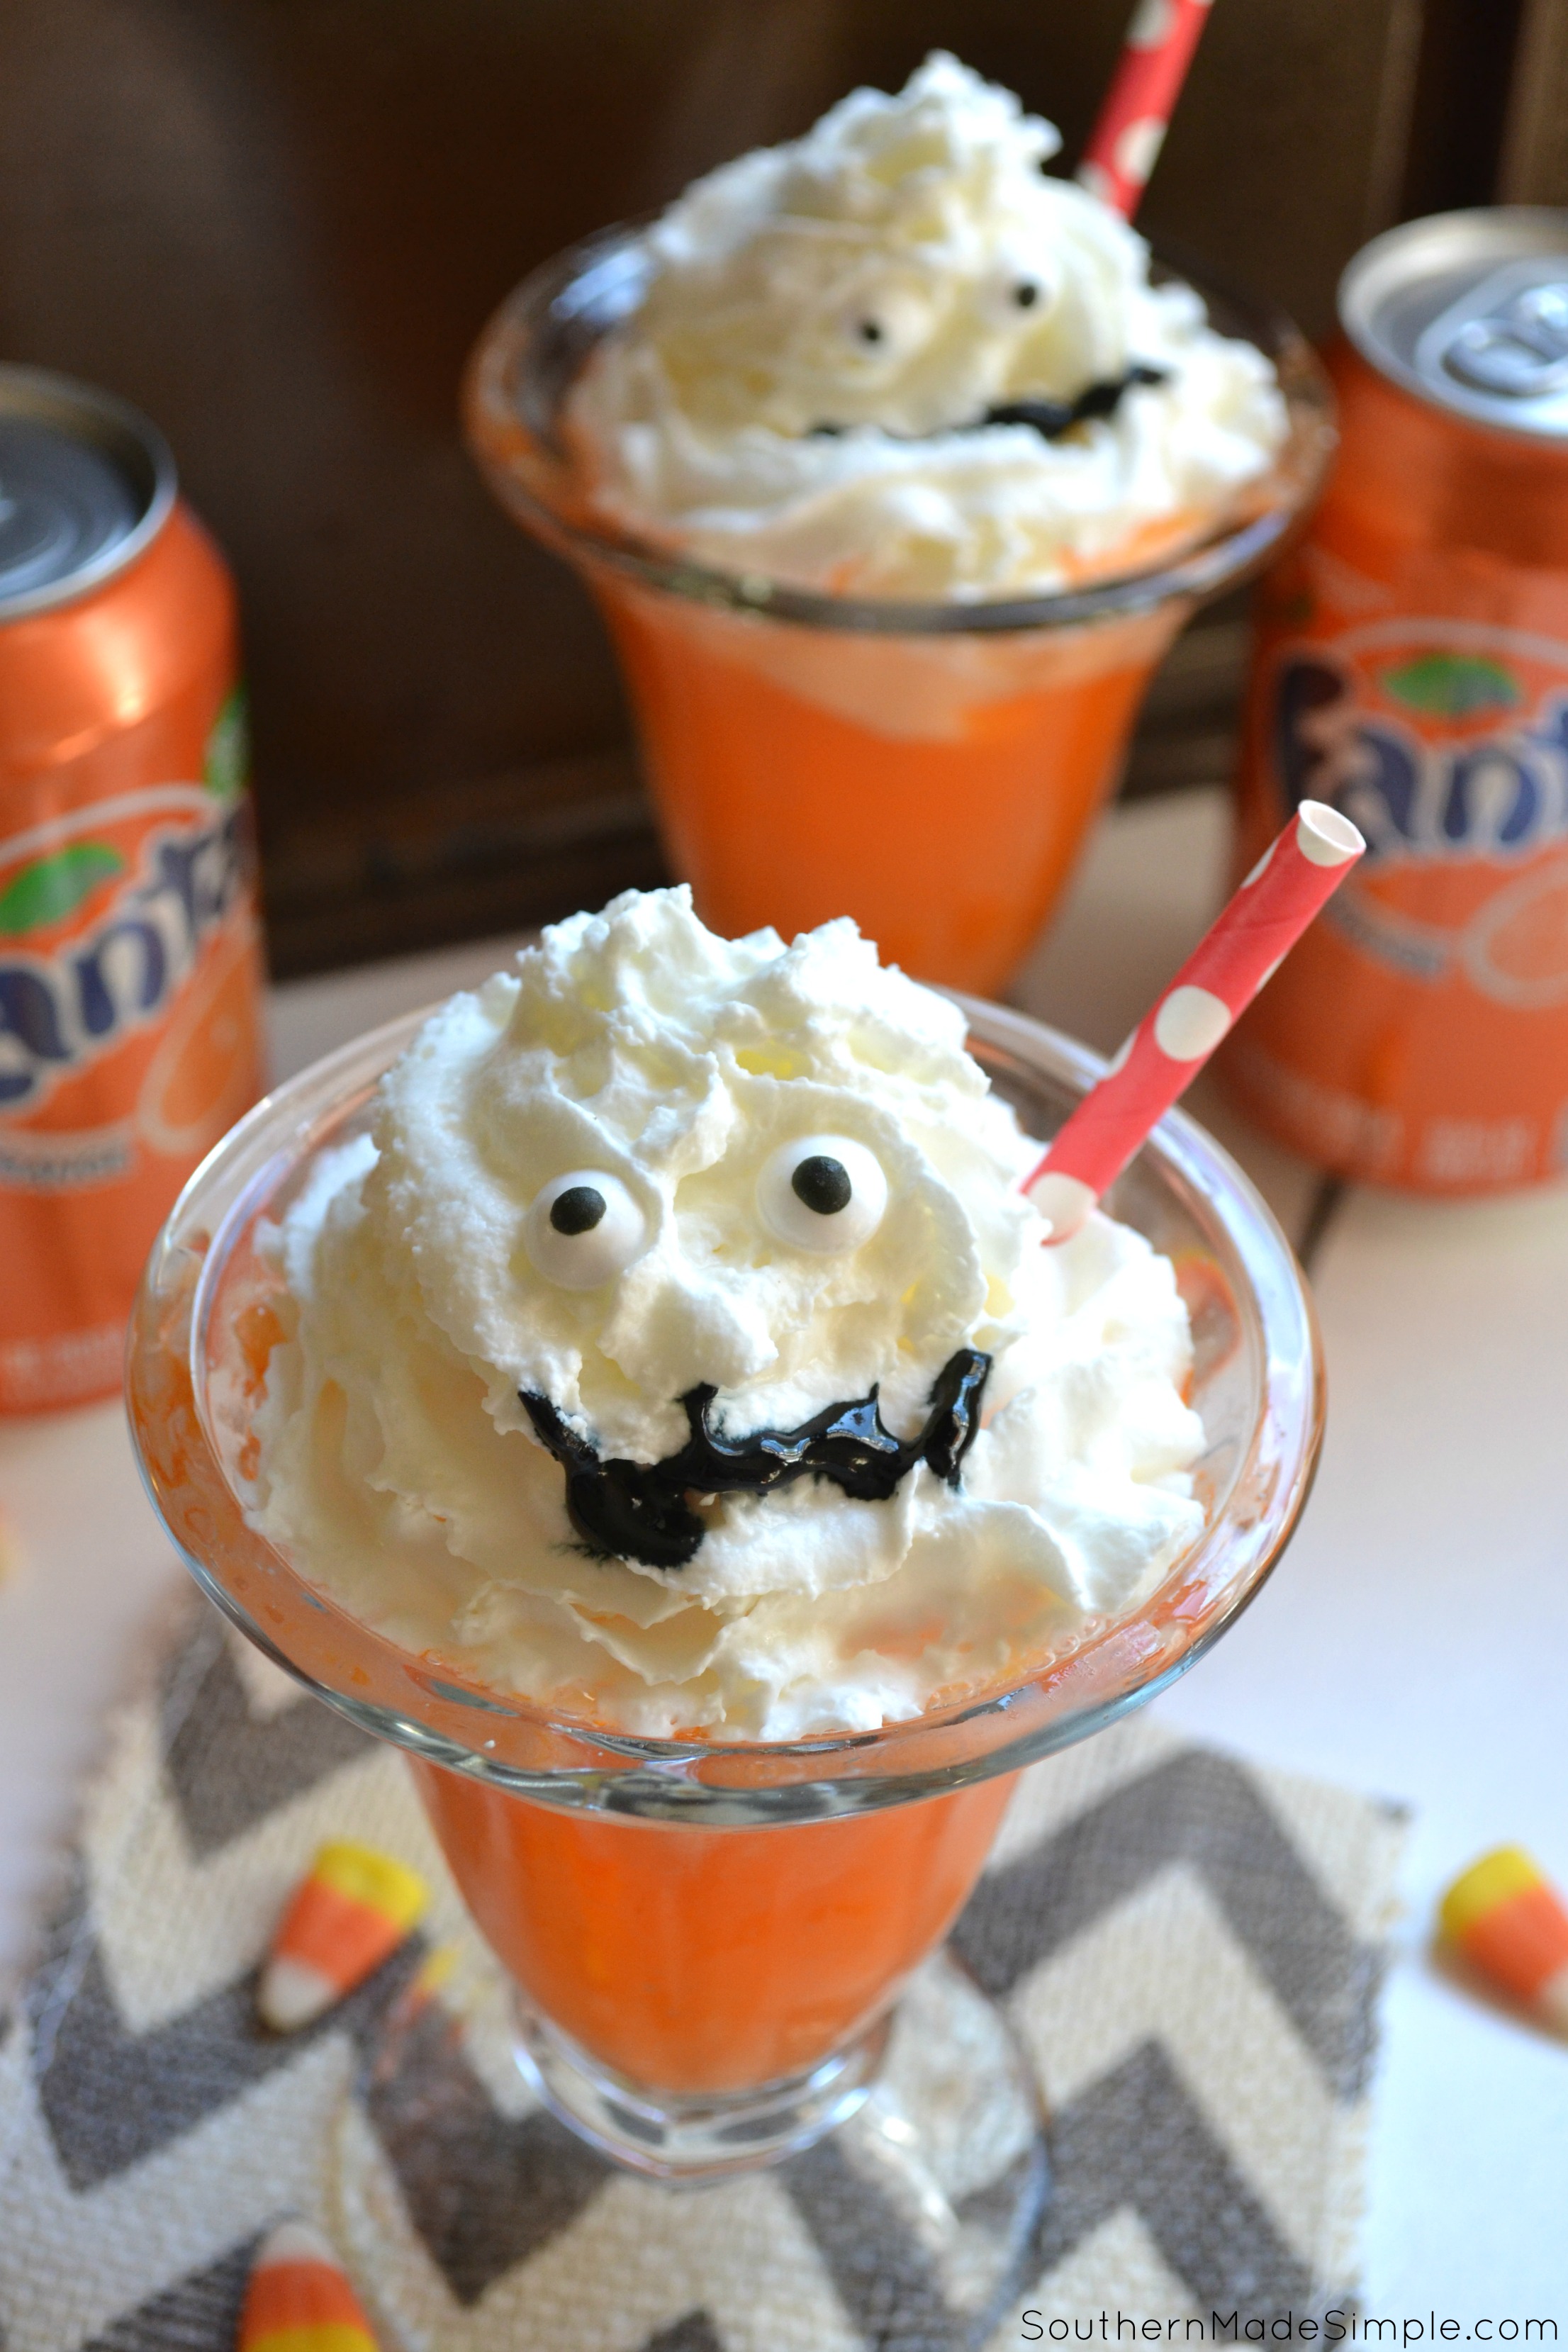 These cute little Orange Fanta Scram-scicle floats are the perfect treat to serve for a hauntingly awesome Halloween! They're simple to make and even more fun to devour...if you dare! #WickedFantaFun #ad